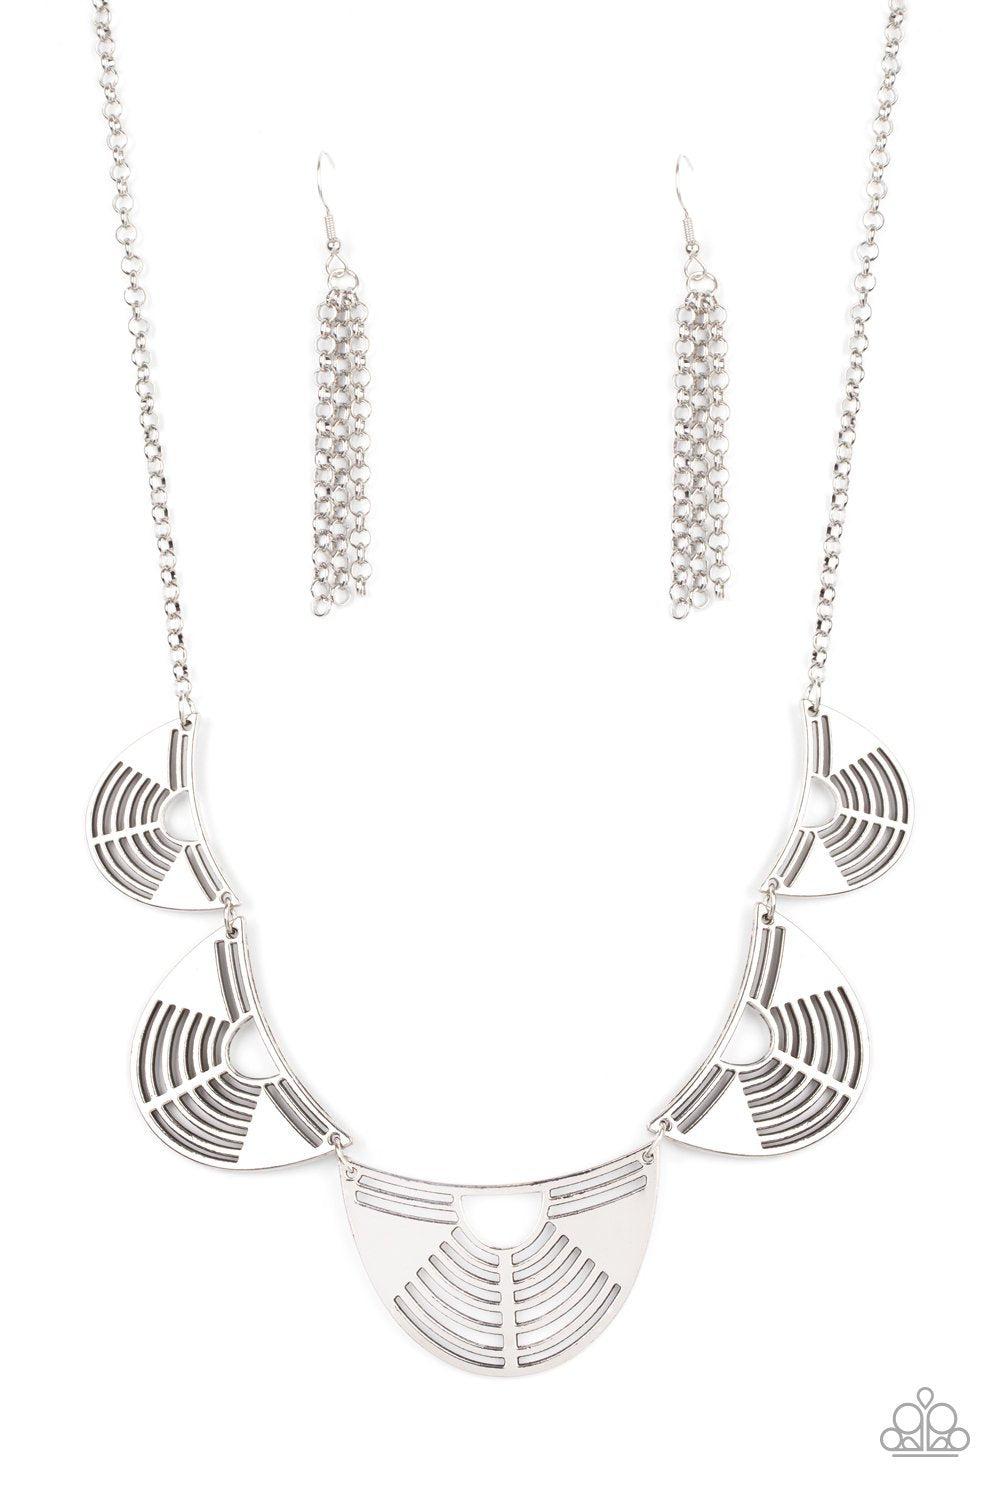 Record-Breaking Radiance Silver Necklace - Paparazzi Accessories-CarasShop.com - $5 Jewelry by Cara Jewels